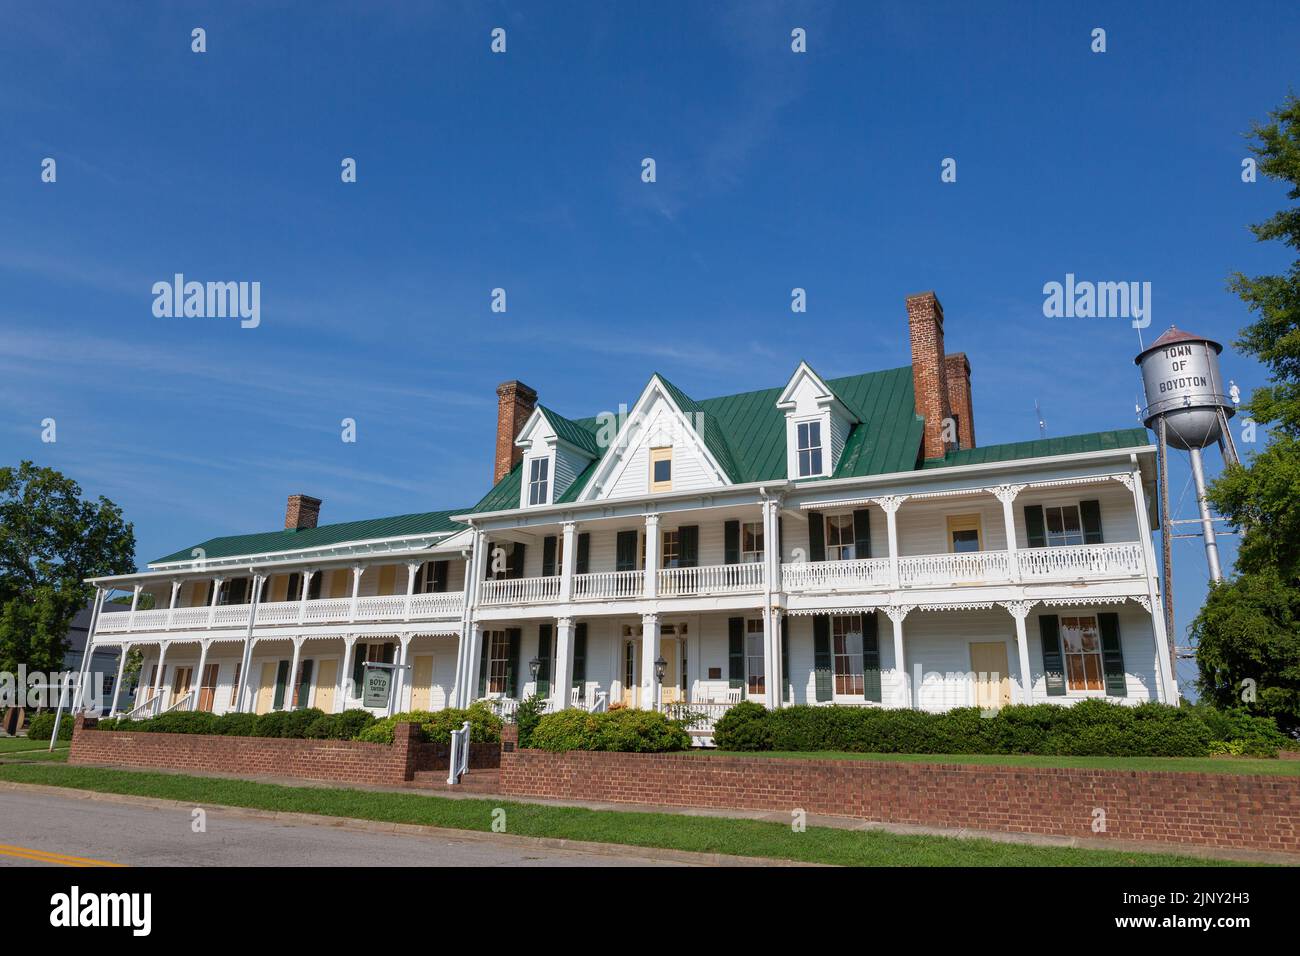 View of the historic town of Boydton in Virginia. The colonial style Boyd Tavern on Washington street. Stock Photo